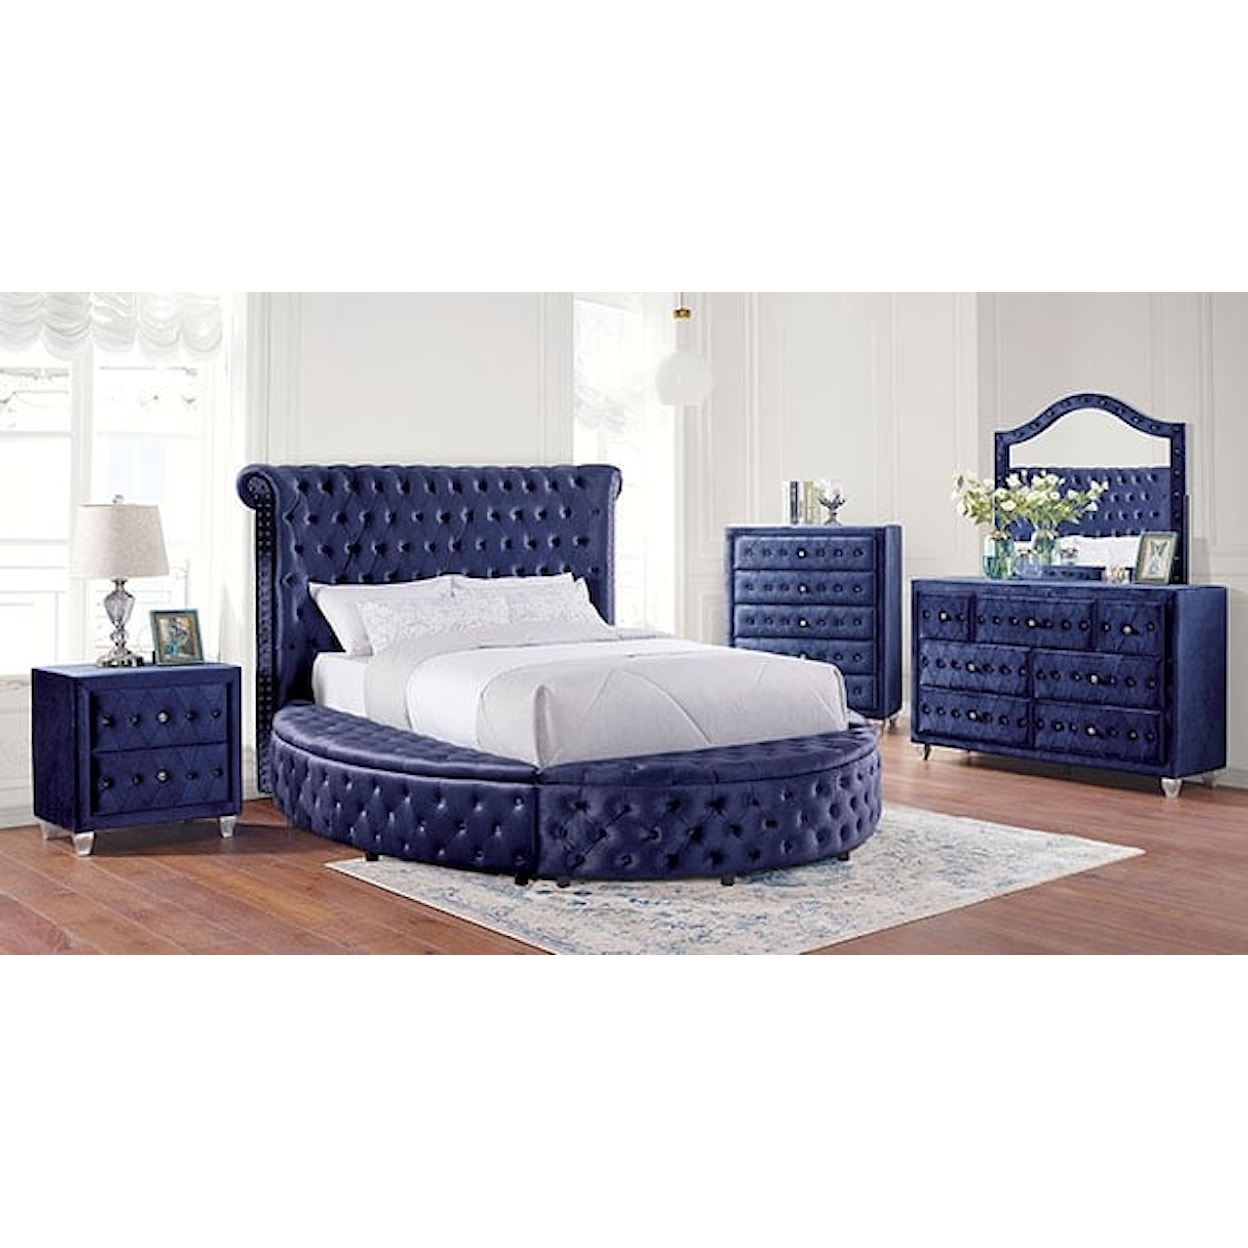 Furniture of America Sansom California King Upholstered Round Bed